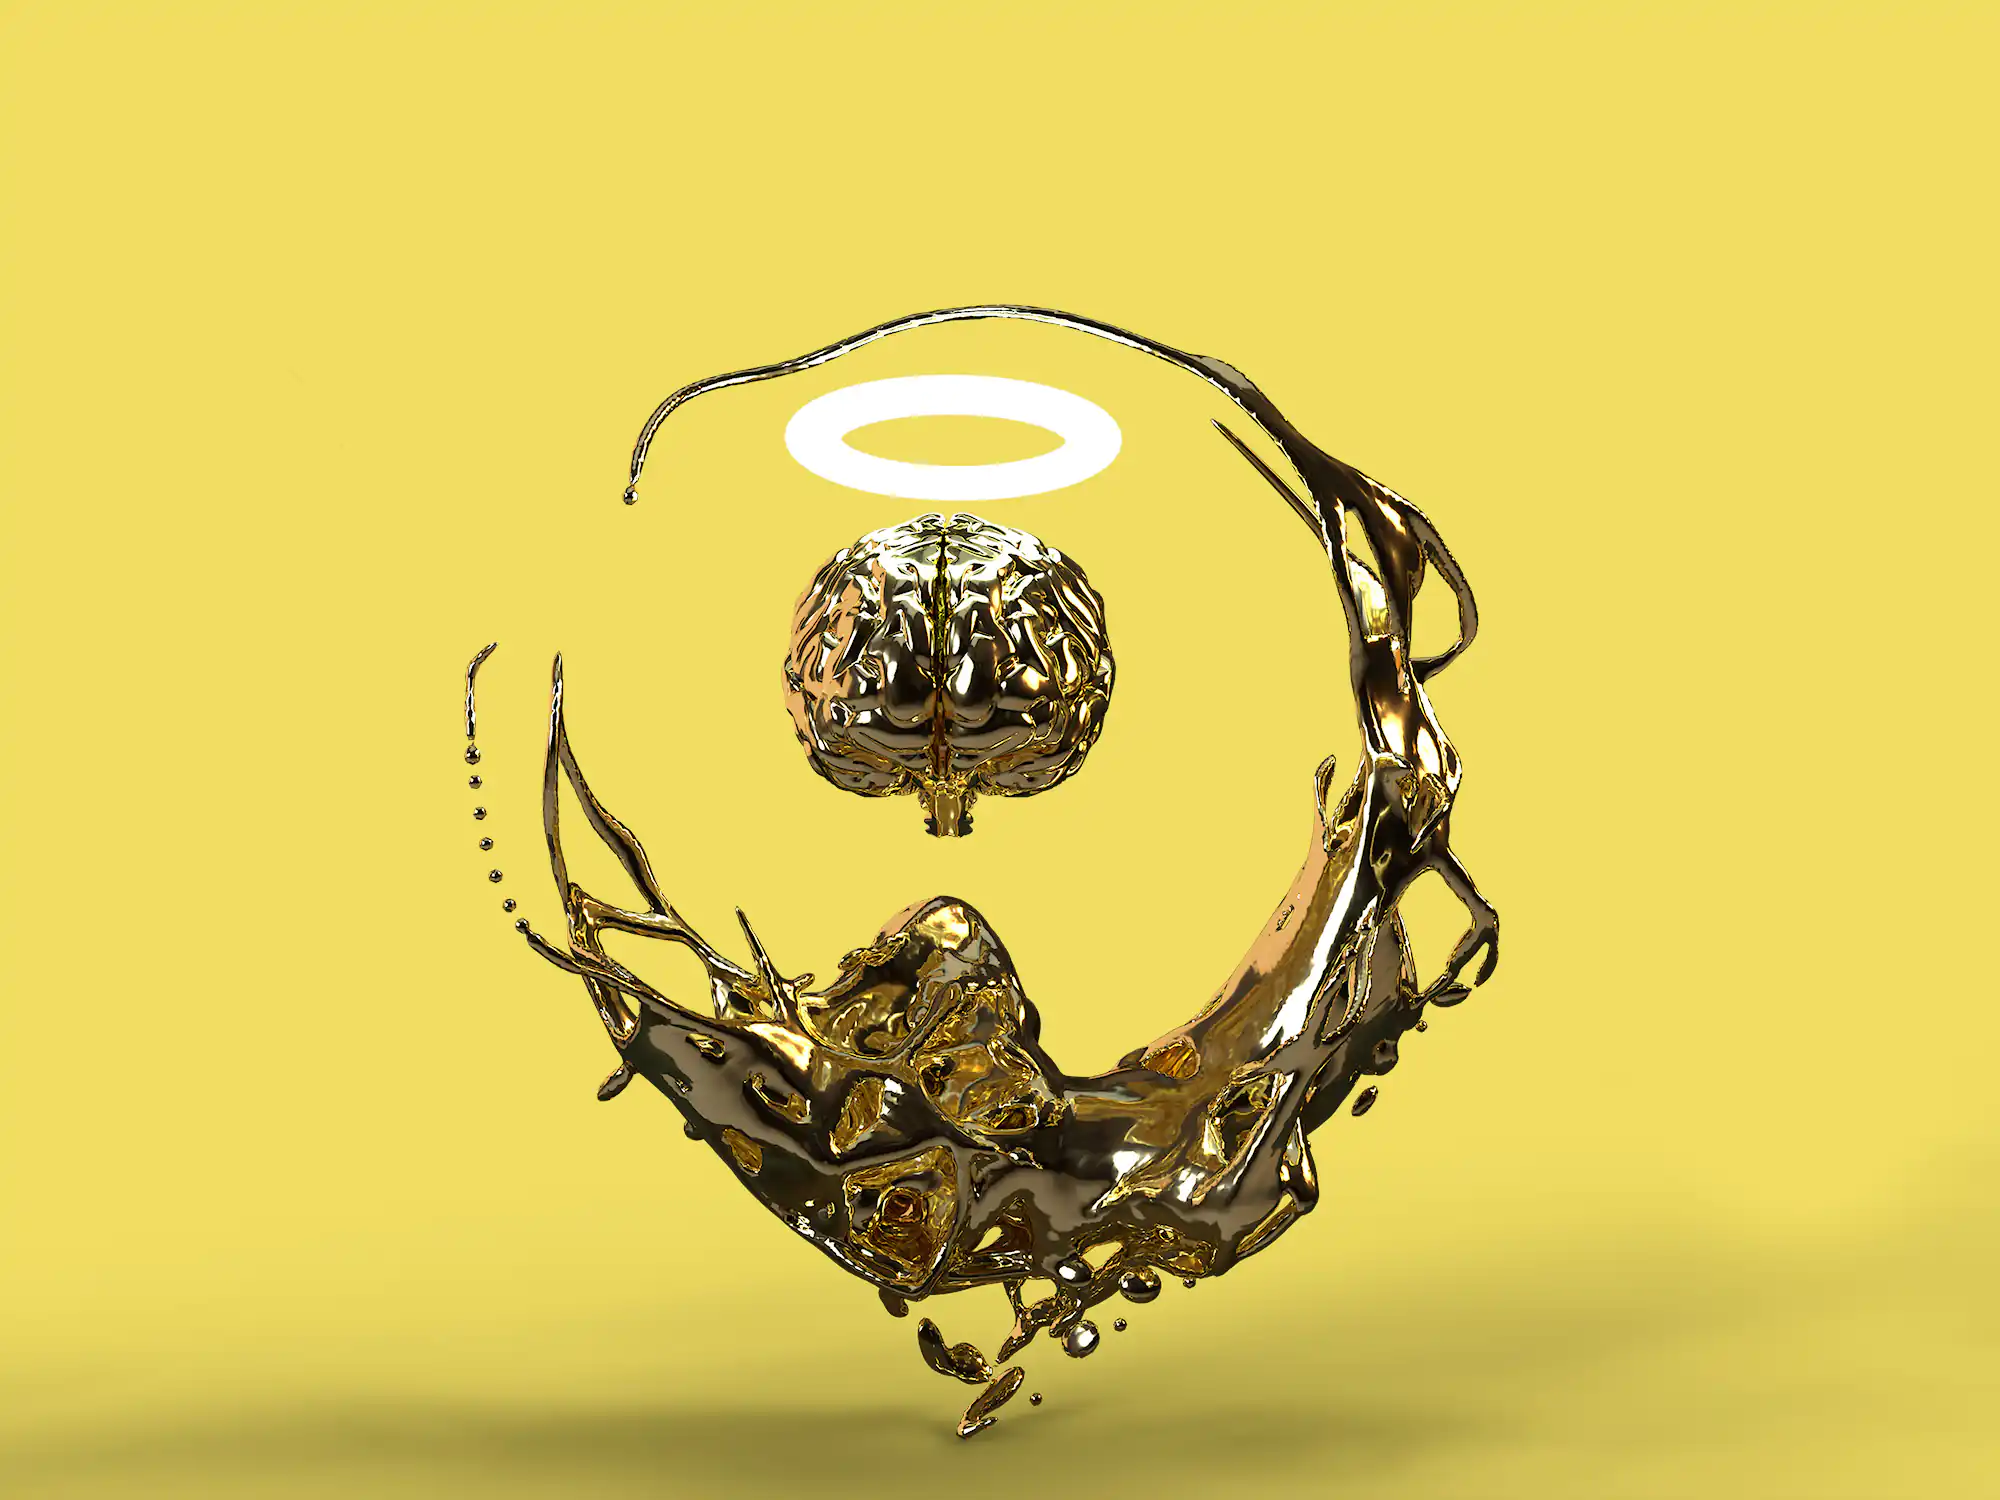 This golden sculpture shows a brain with a halo inside an abstract swirl of liquid